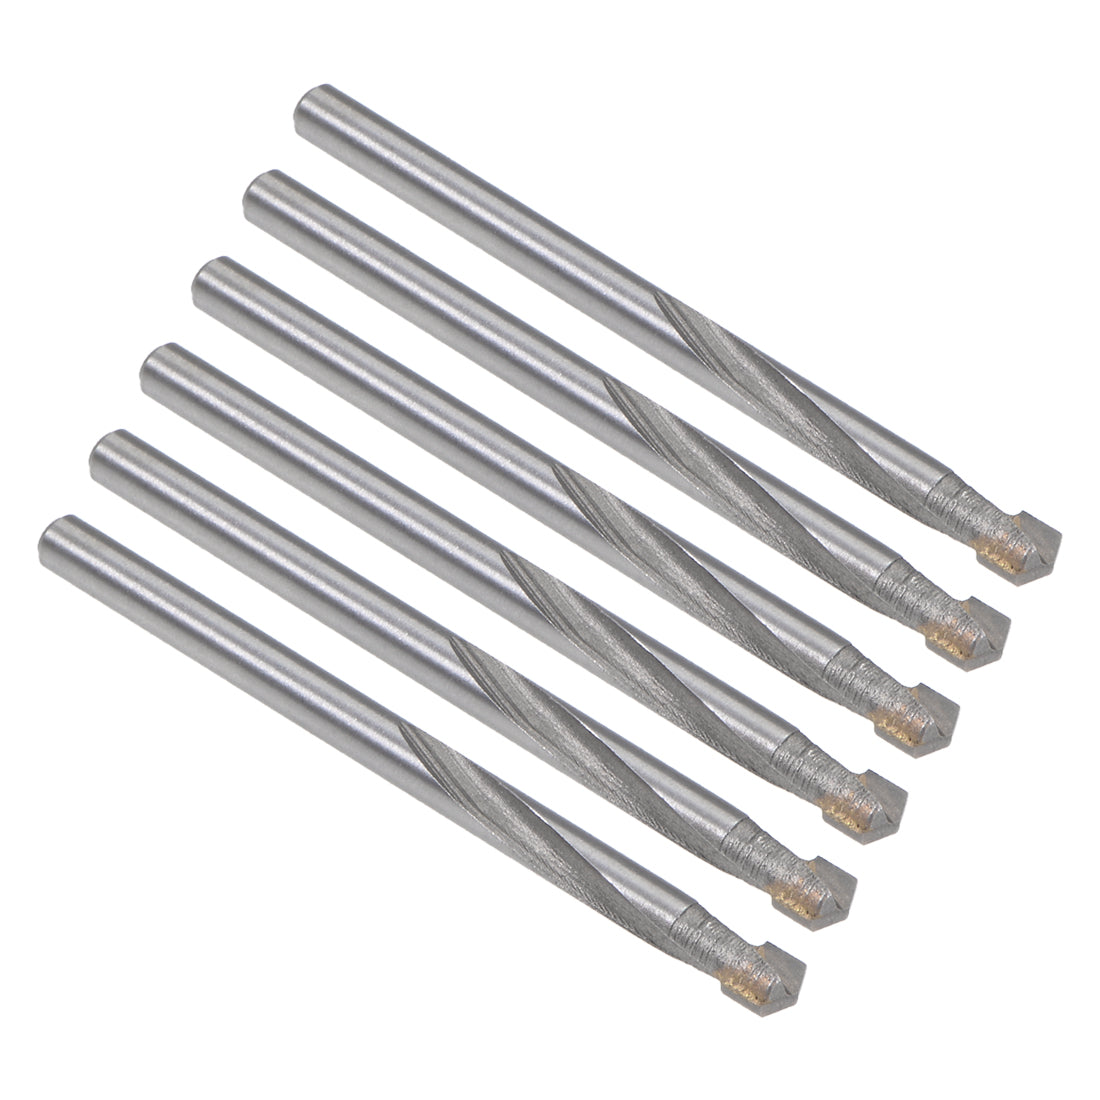 uxcell Uxcell 4.5mm Cemented Carbide Twist Drill Bits for Stainless Steel Copper Aluminum 6Pcs